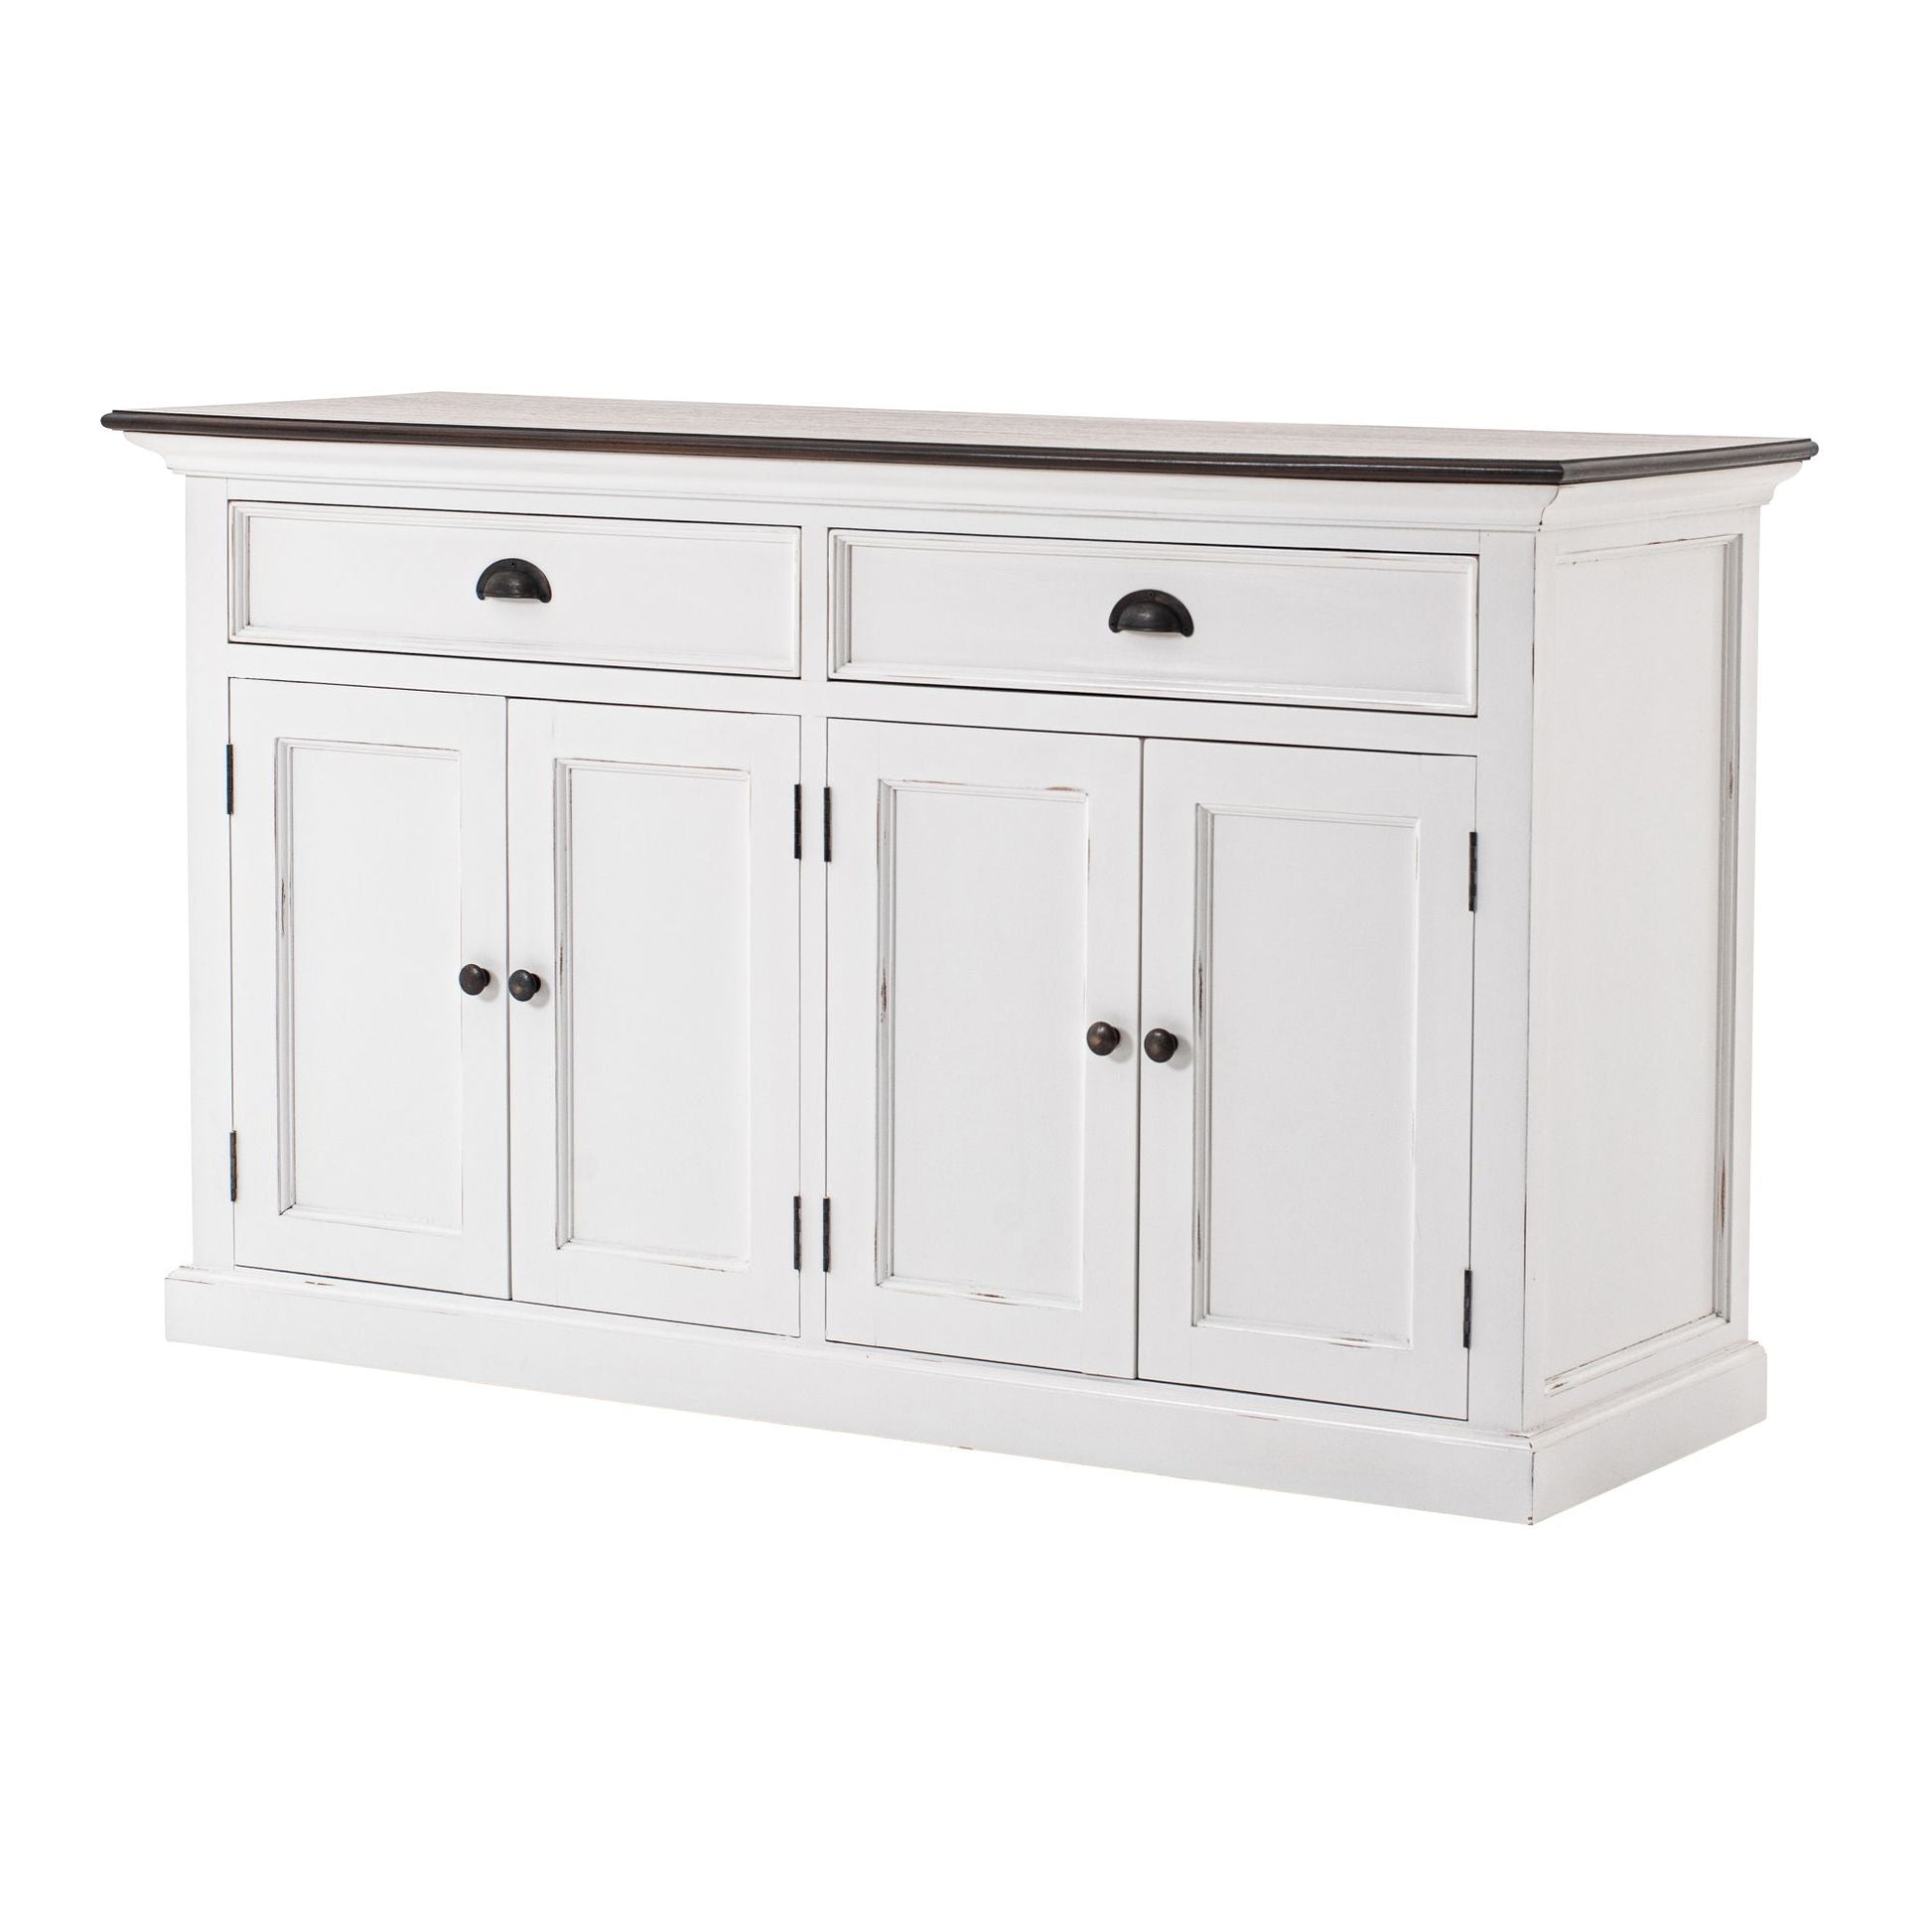 NovaSolo Halifax Accent 57" White & Brown Mahogany Buffet With 4 Doors & 2 Drawers